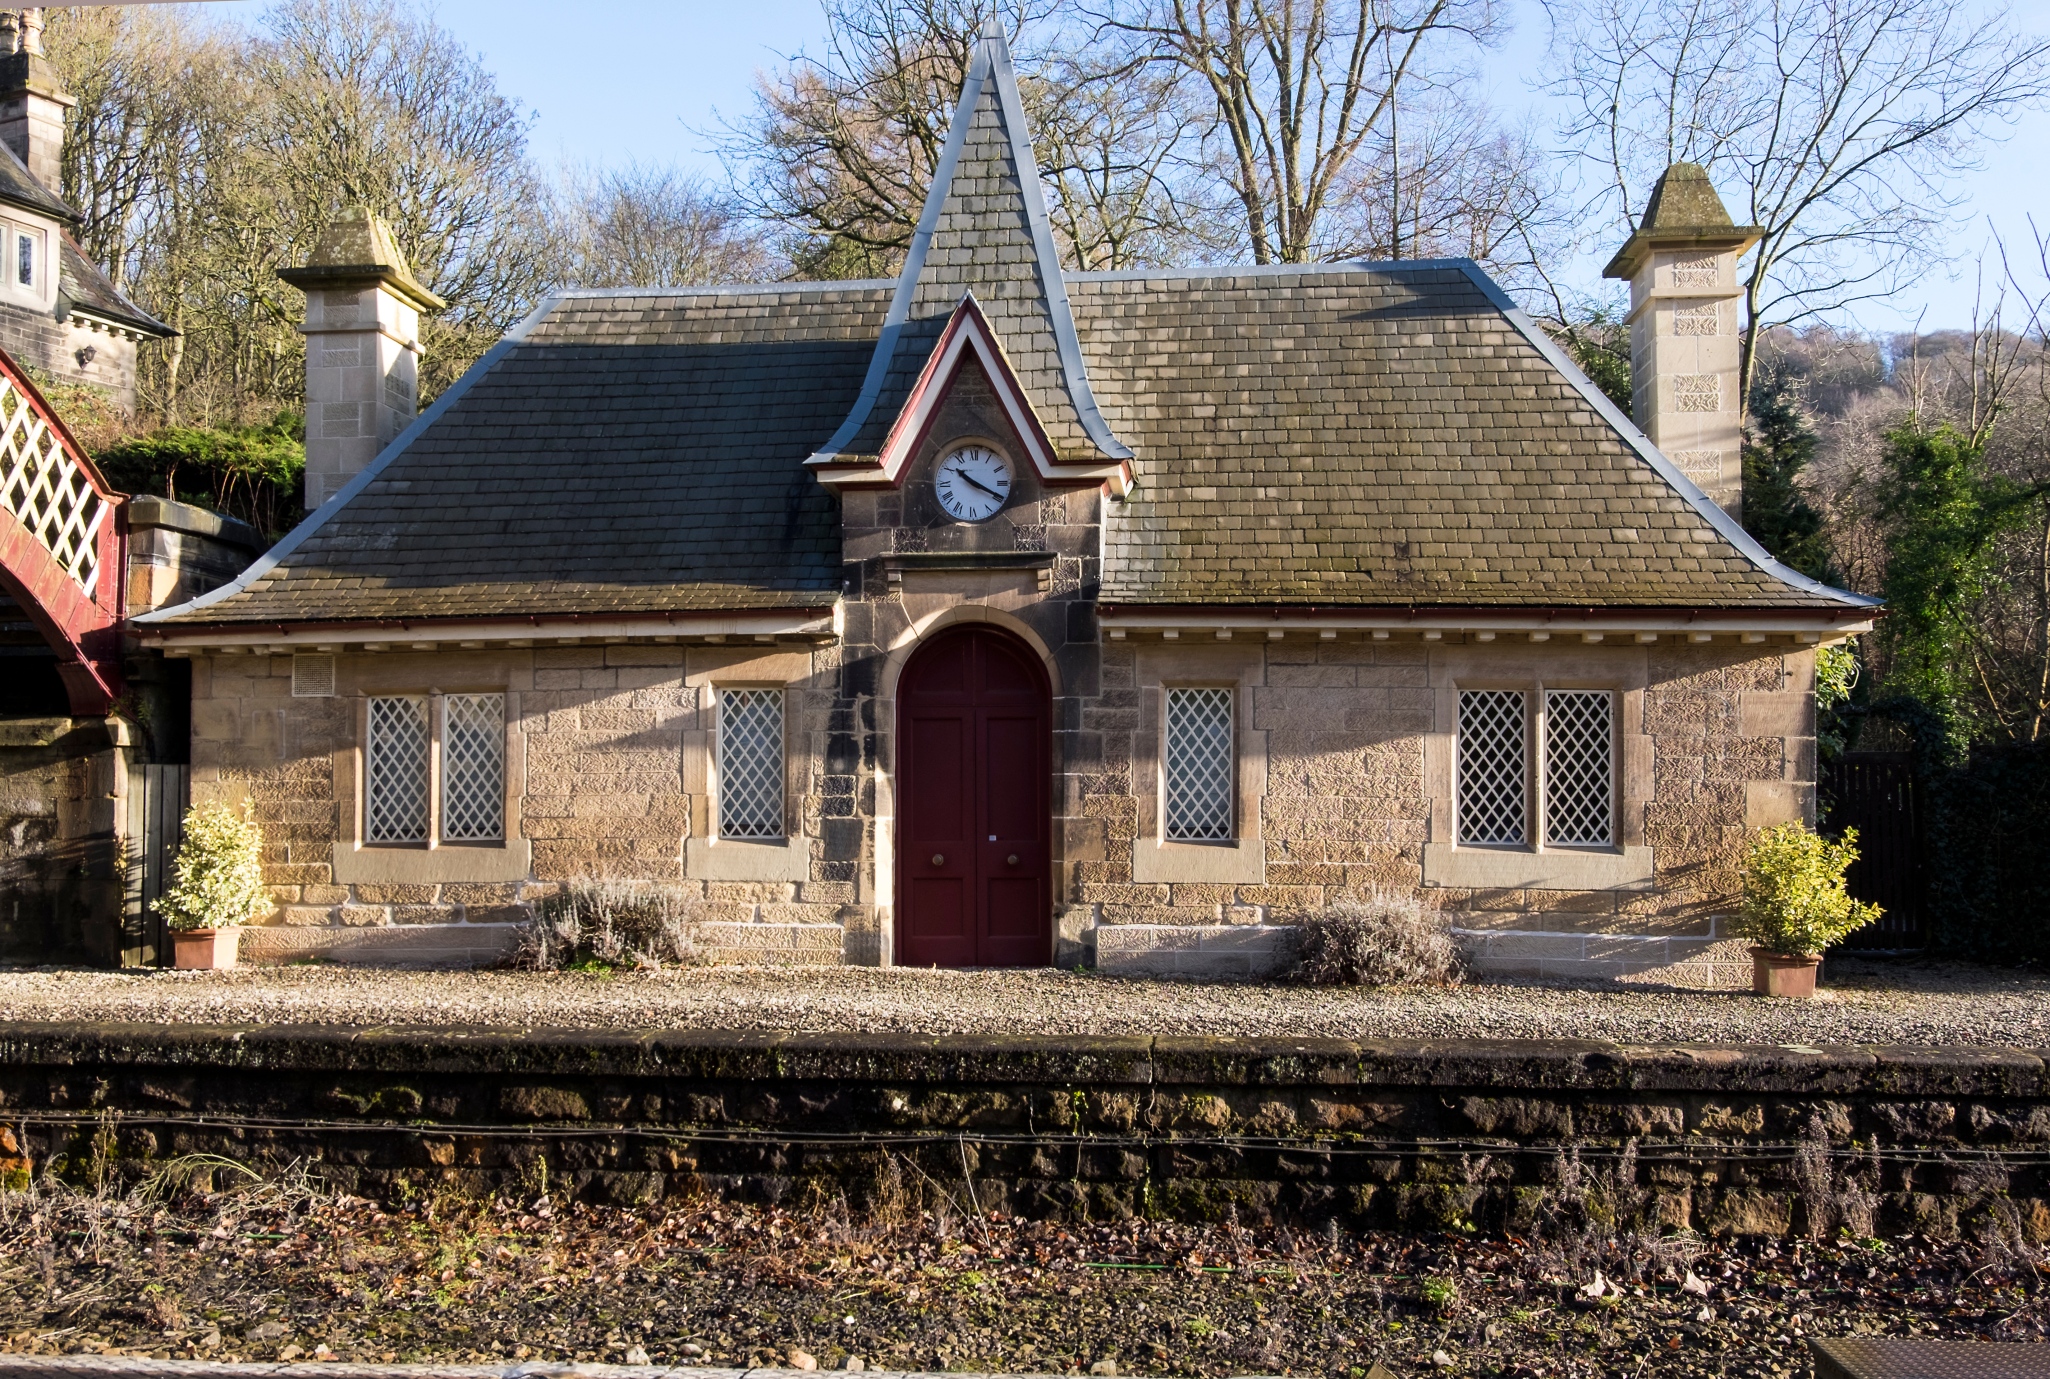 Listed building at Cromford railway station Derbyshire